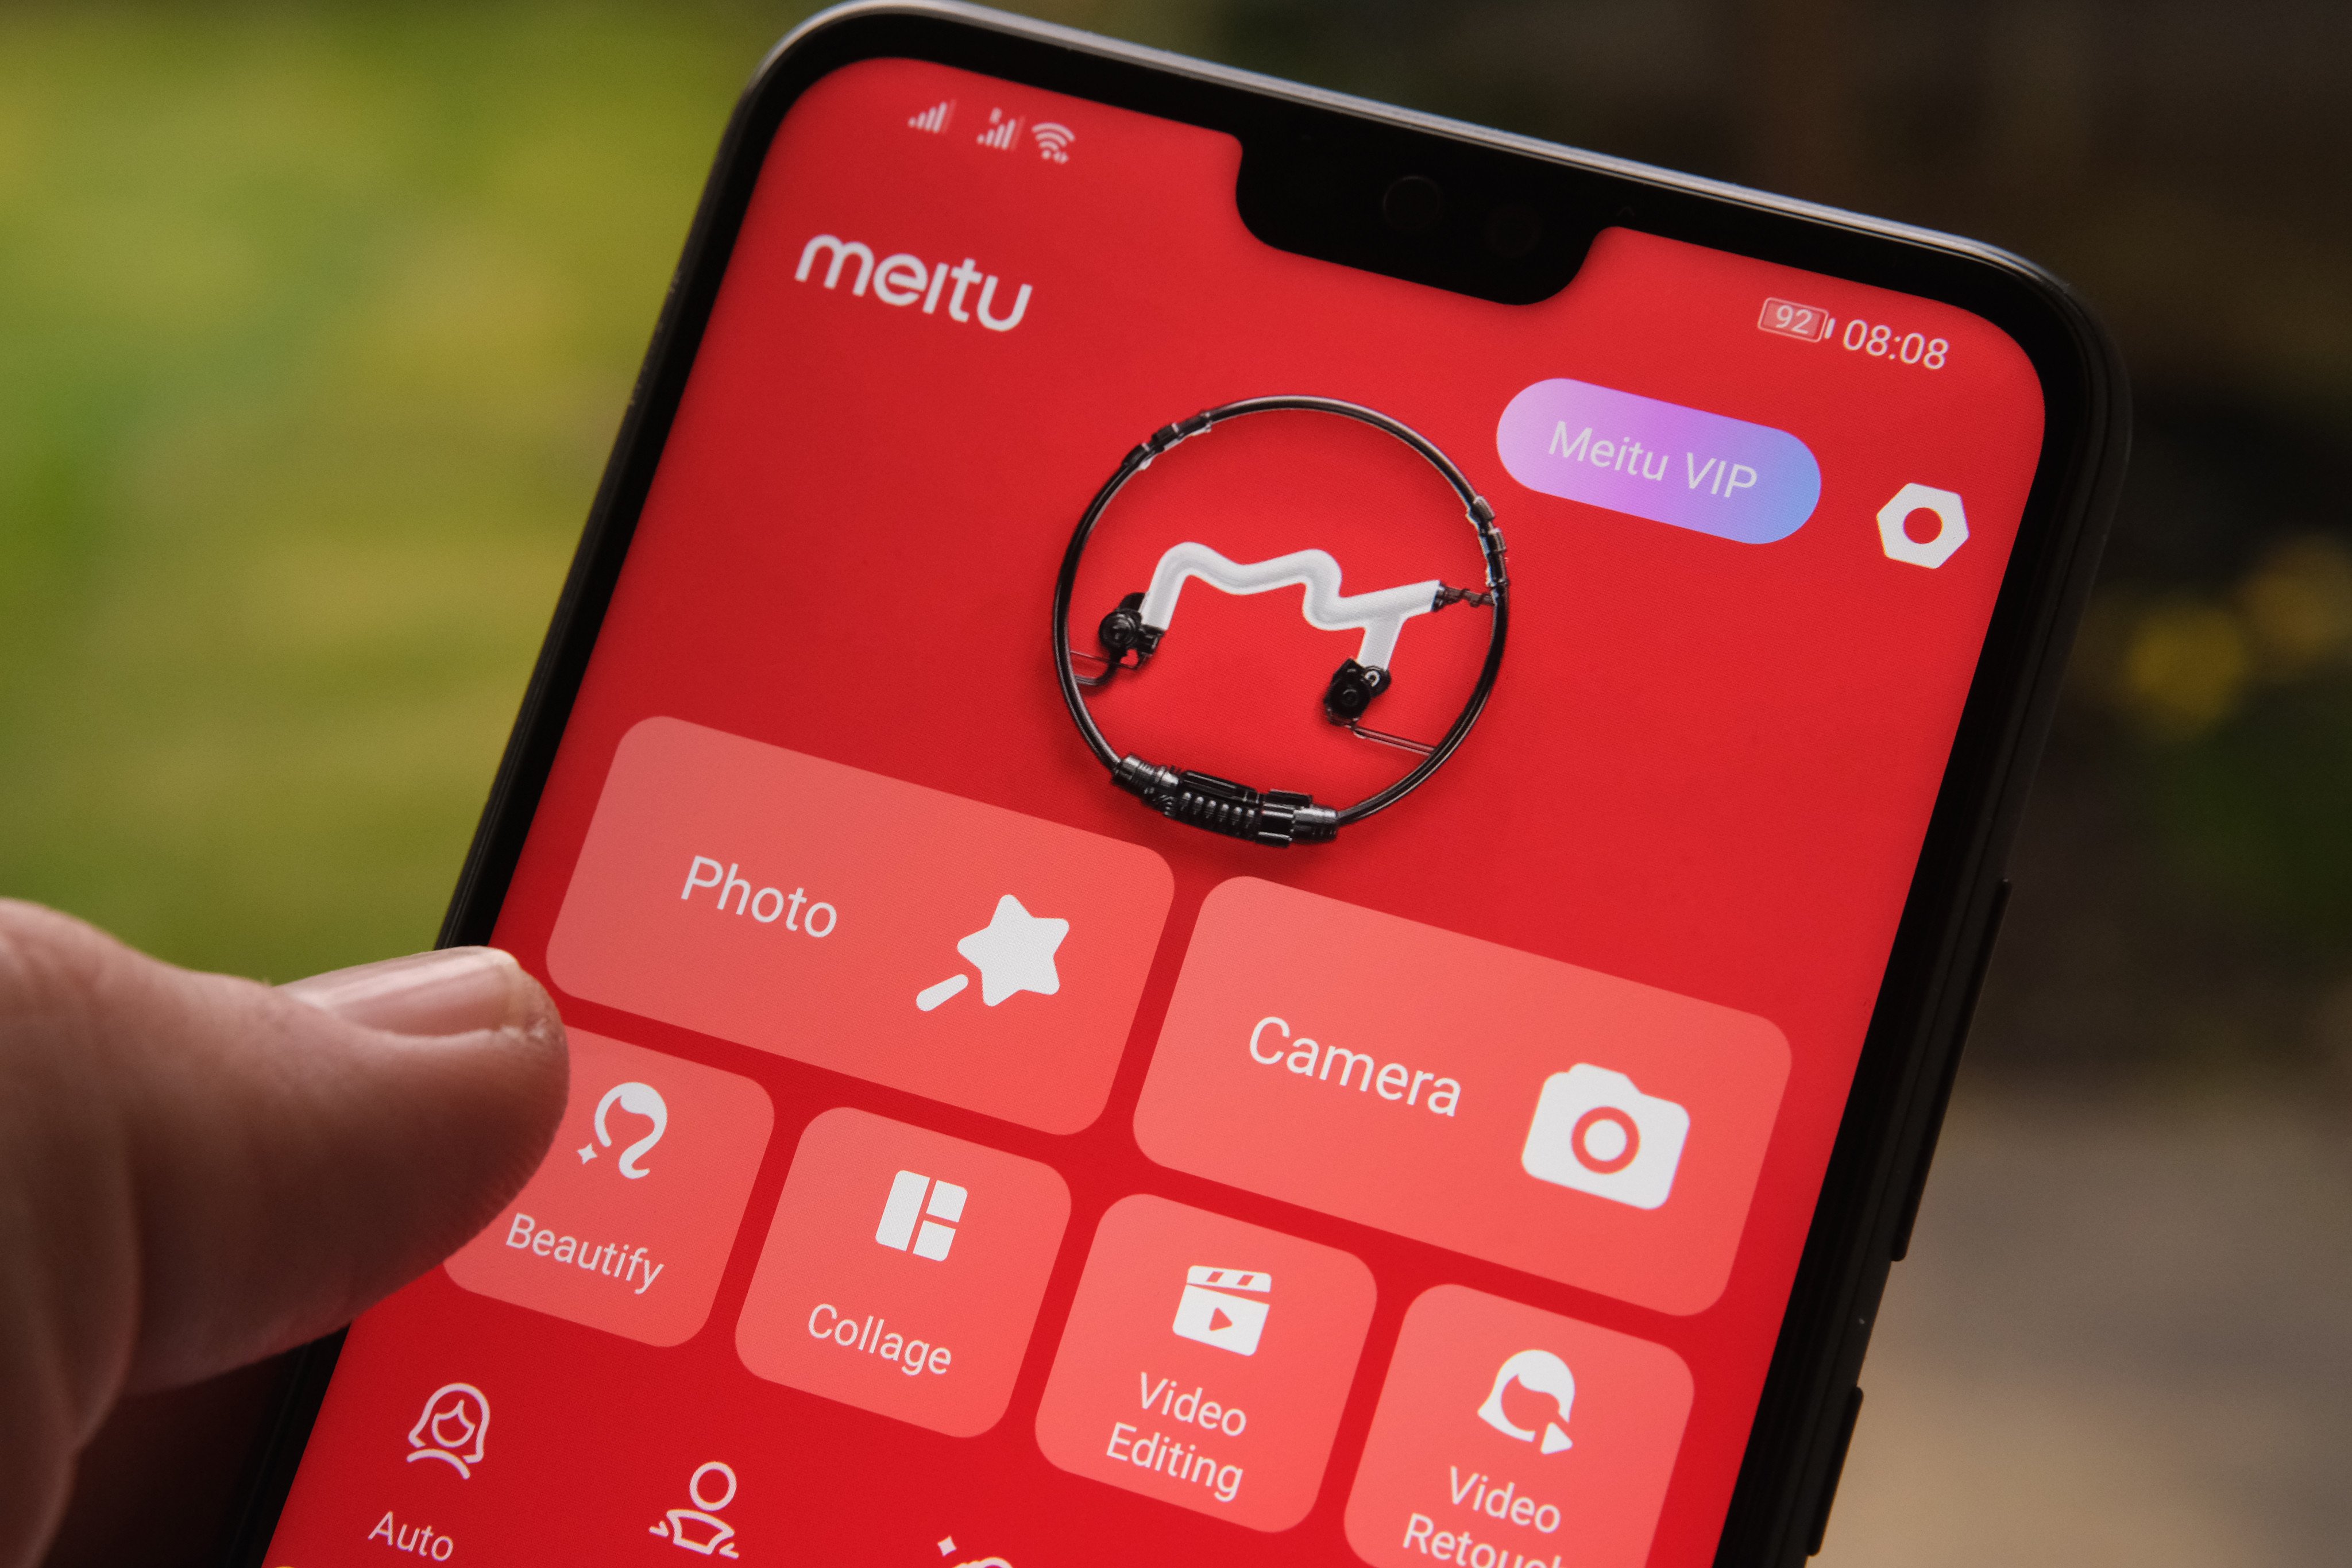 Meitu’s successful push into generative artificial intelligence helped advance its global expansion, as its products are now available in 195 countries and regions. Photo: Shutterstock